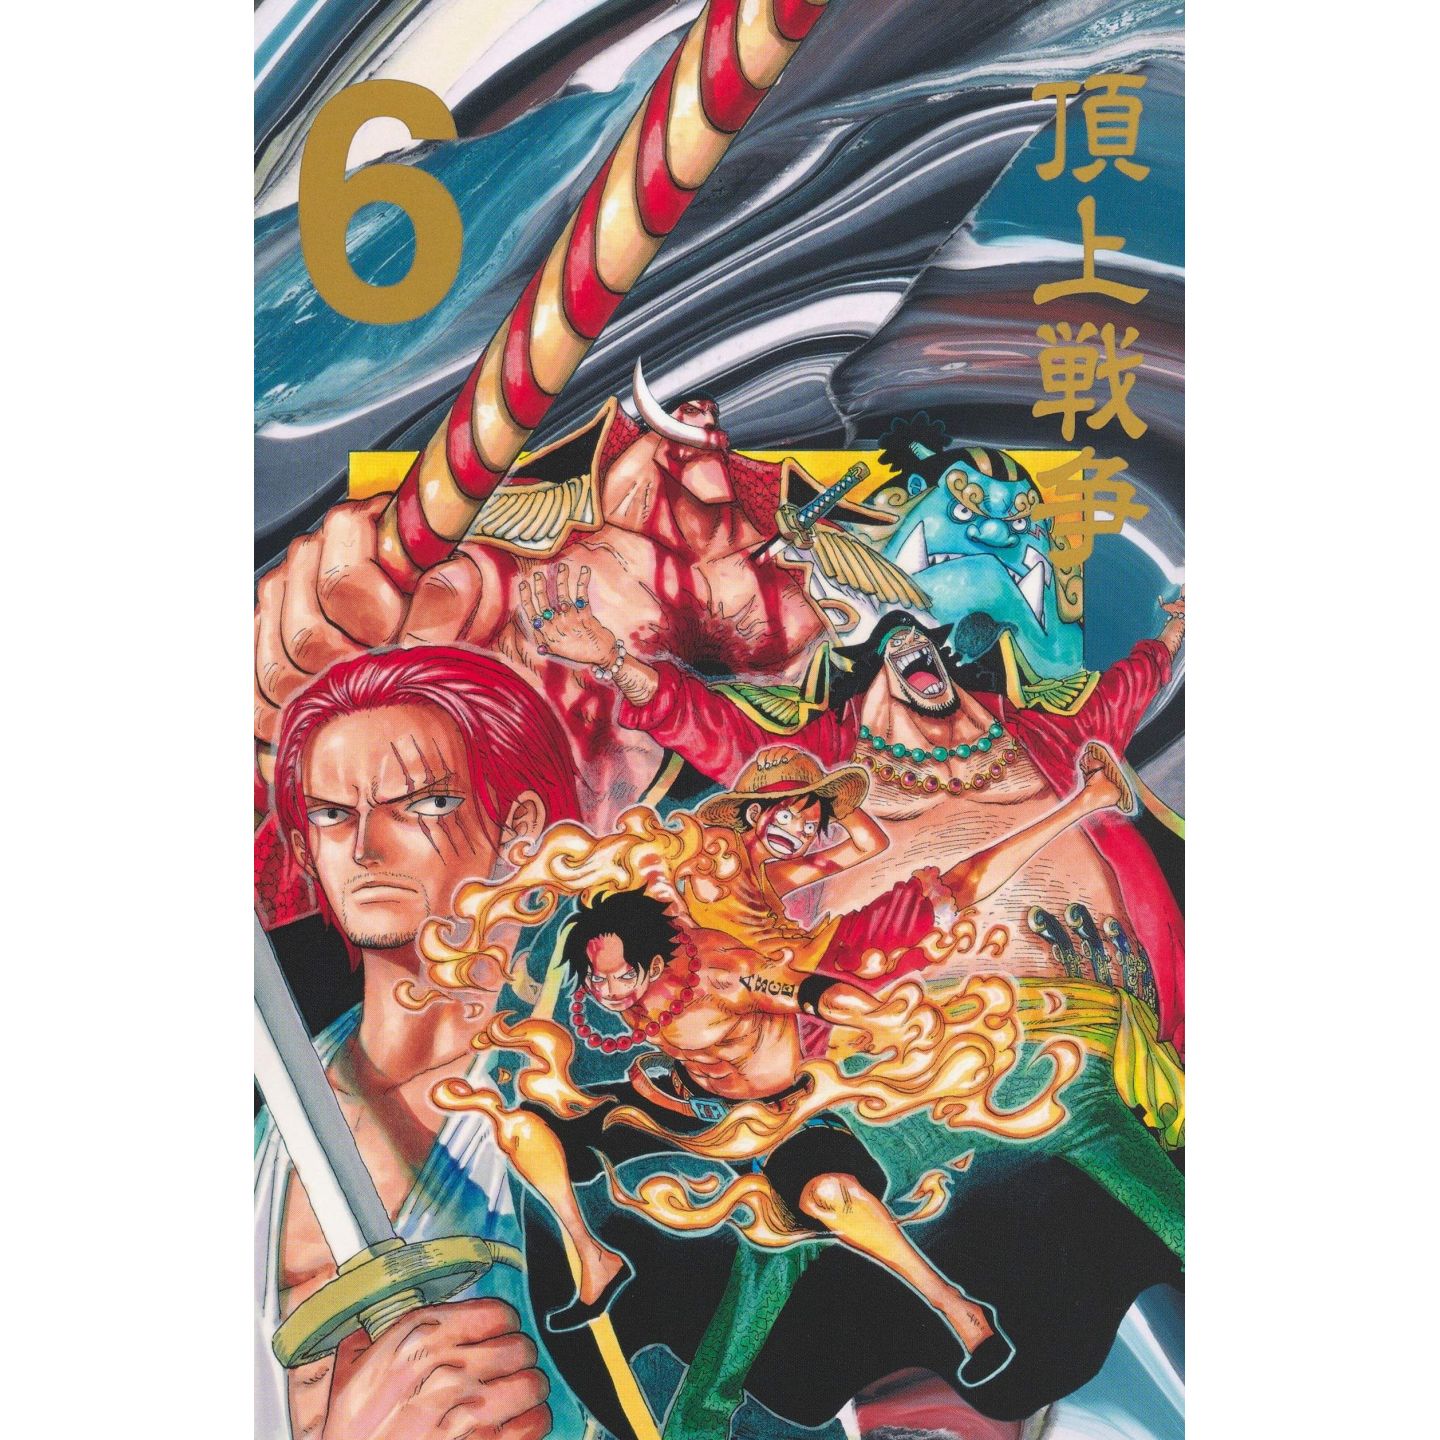 BOOK ONE PIECE PART2 EP6 BOX MARINE FORD (8 PCS)